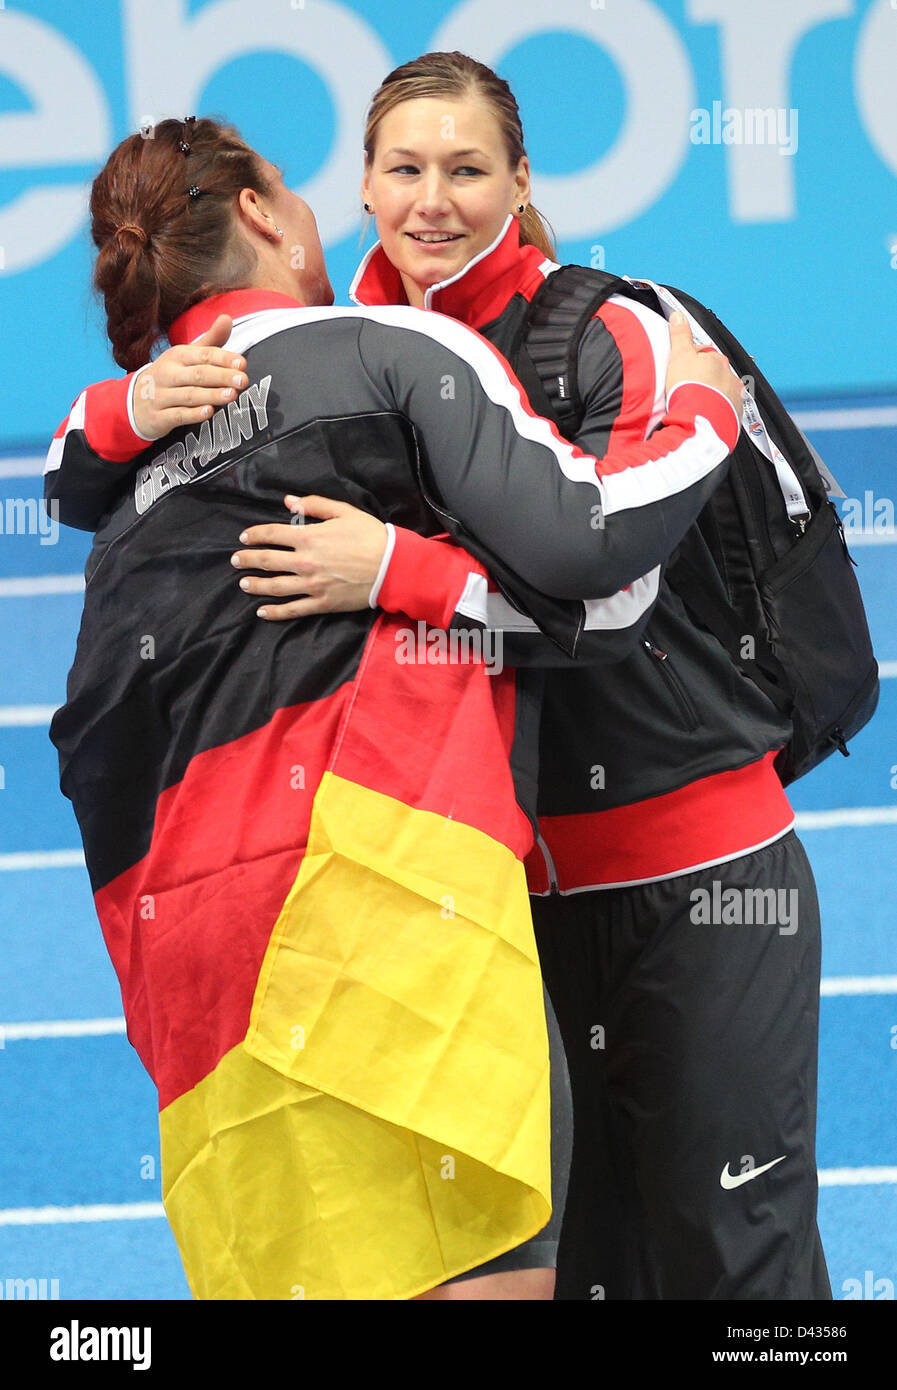 Germany's Christina Schwanitz celebrates her victory in the women's shot put final with her teammate Josephine Terlecki (r) during the IAAF European Athletics Indoor Championships 2013 in the Scandinavium Arena in Gothenburg, Sweden, March 3, 2013. Schwanitz won the gold medal. Foto: Christian Charisius/dpa +++(c) dpa - Bildfunk+++ Stock Photo